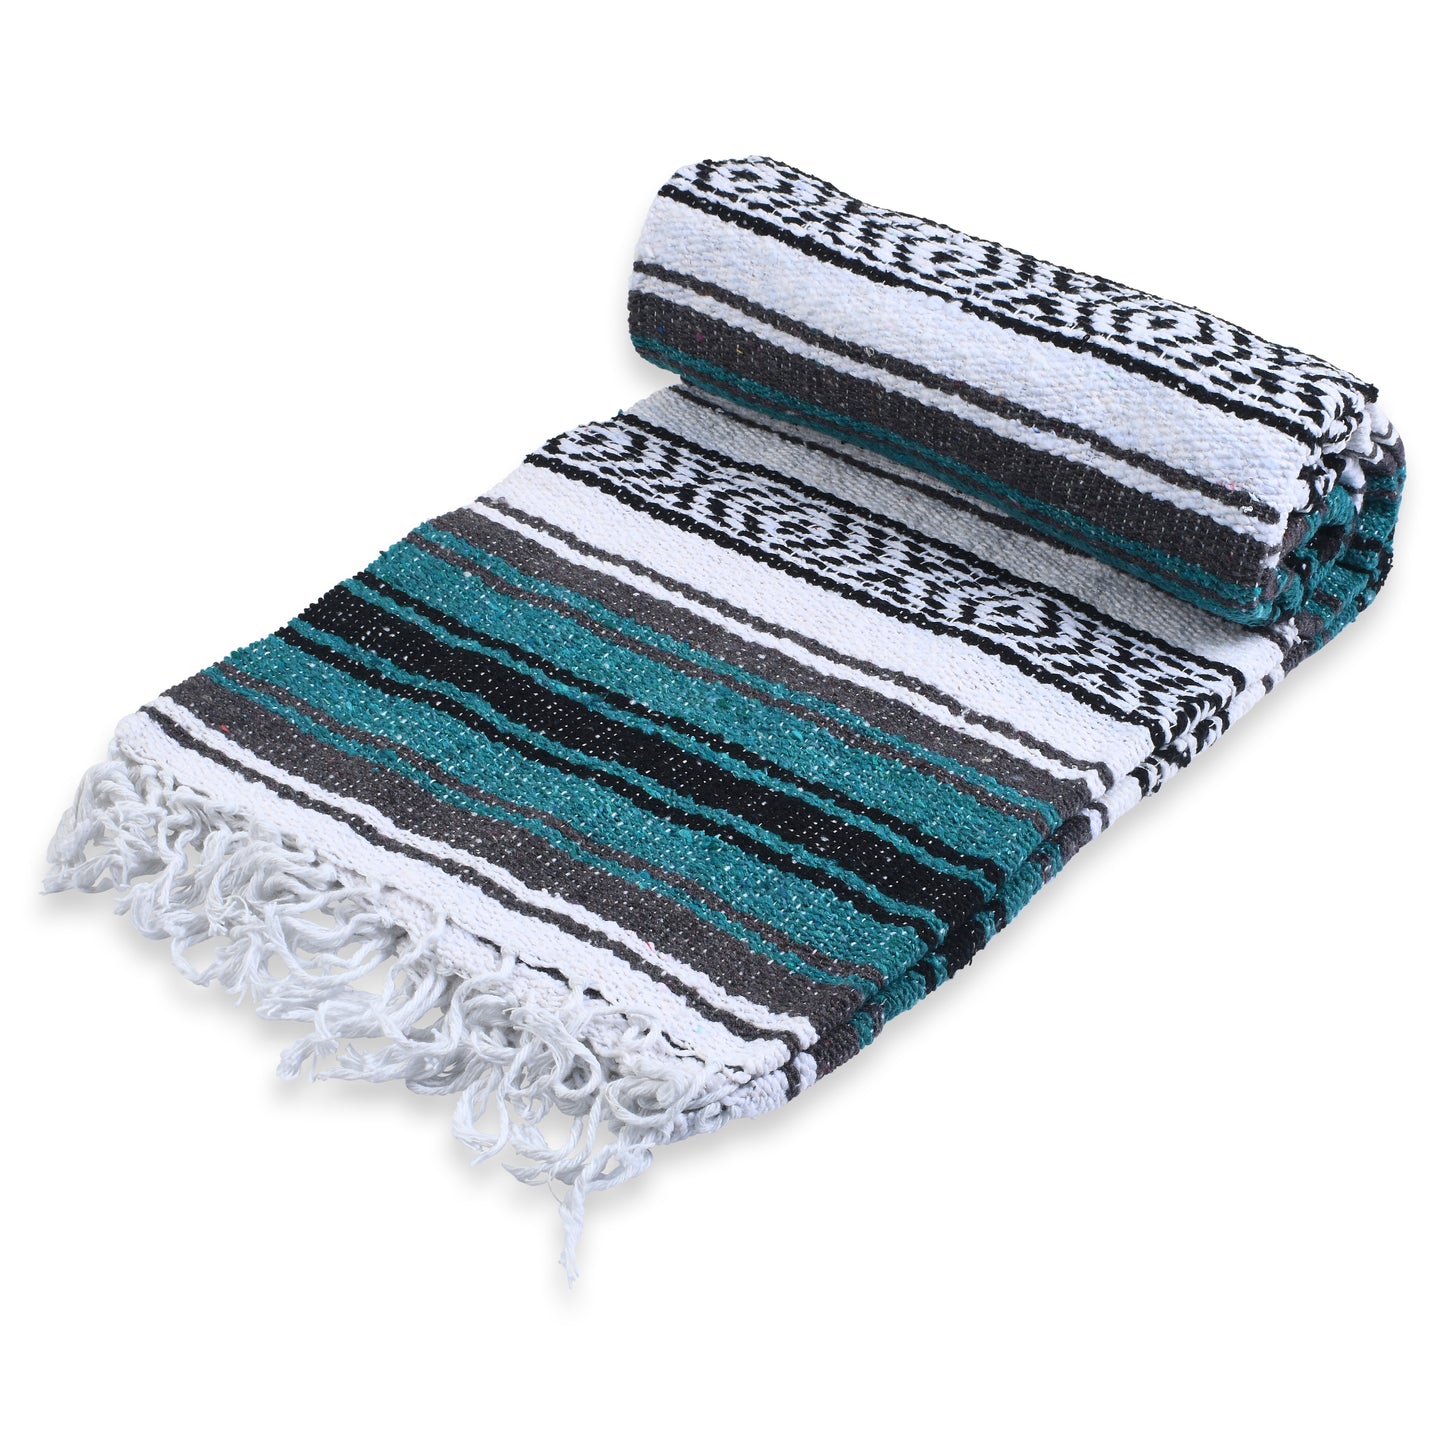 Mexican Blanket, Ocean -  for Yoga, Camping, Picnics, Beach - WHOLESALE